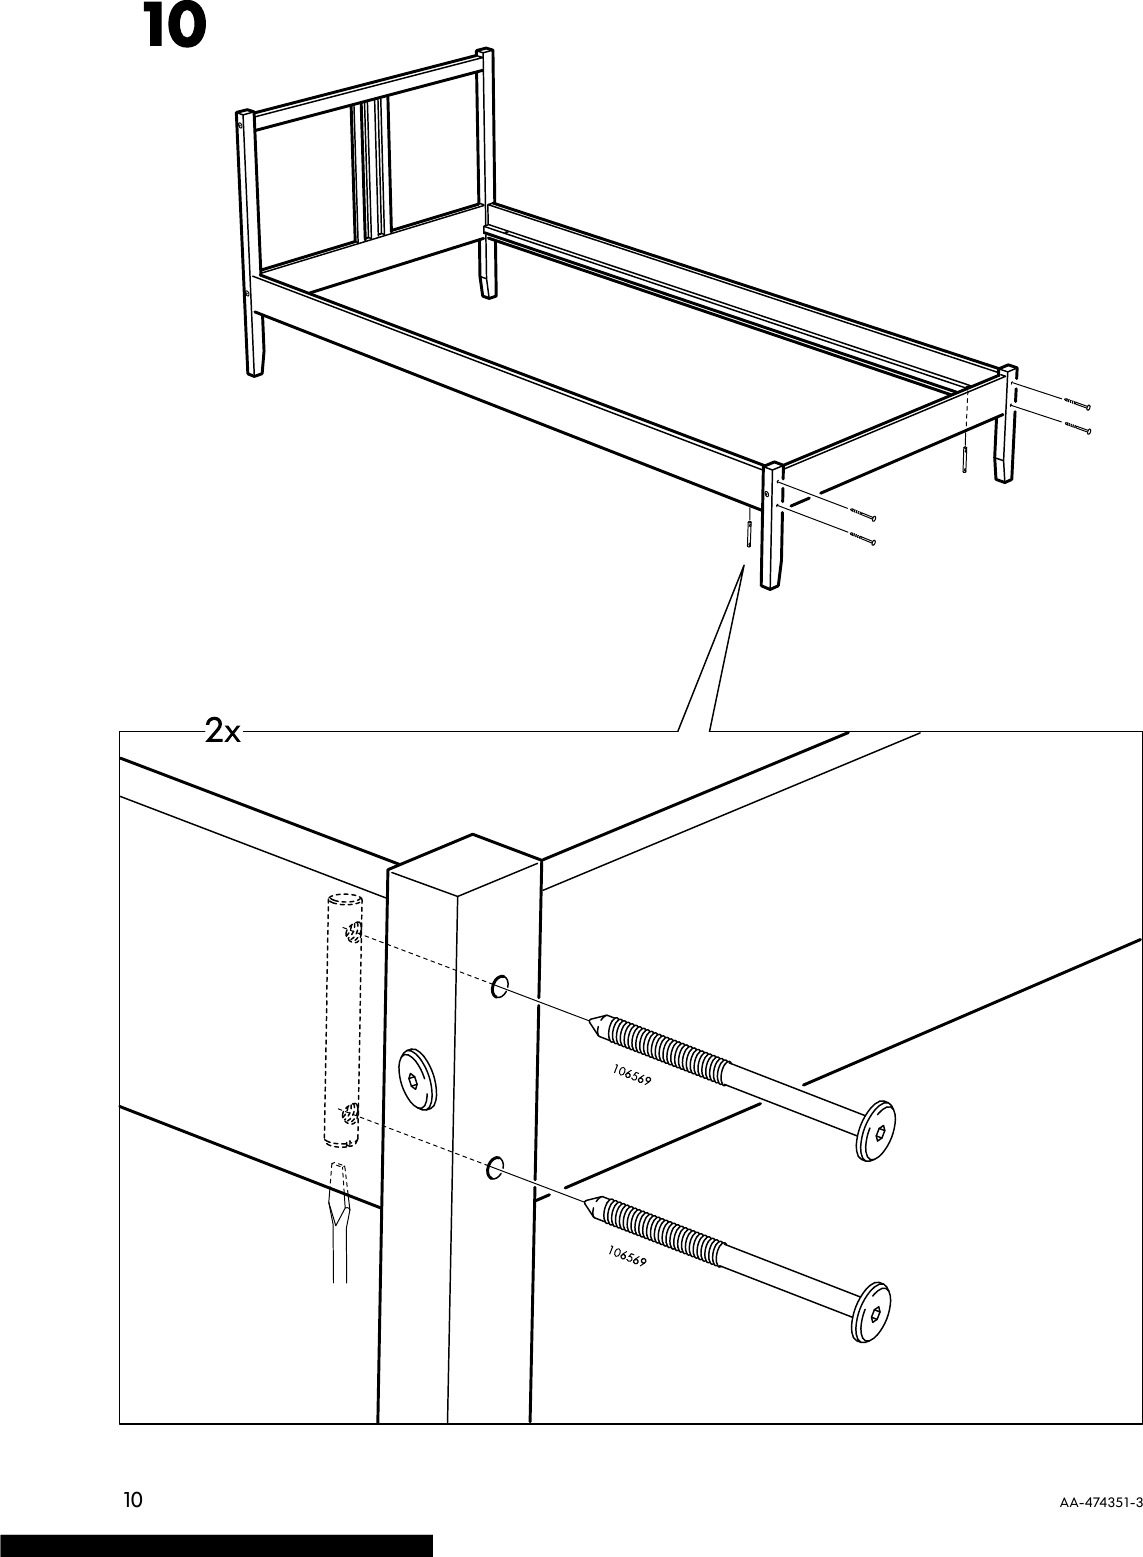 Page 10 of 12 - Ikea Ikea-Fjellse-Bed-Frame-Tw-Instructions-Manual-822426 ManualsLib - Makes It Easy To Find Manuals Online! User Manual